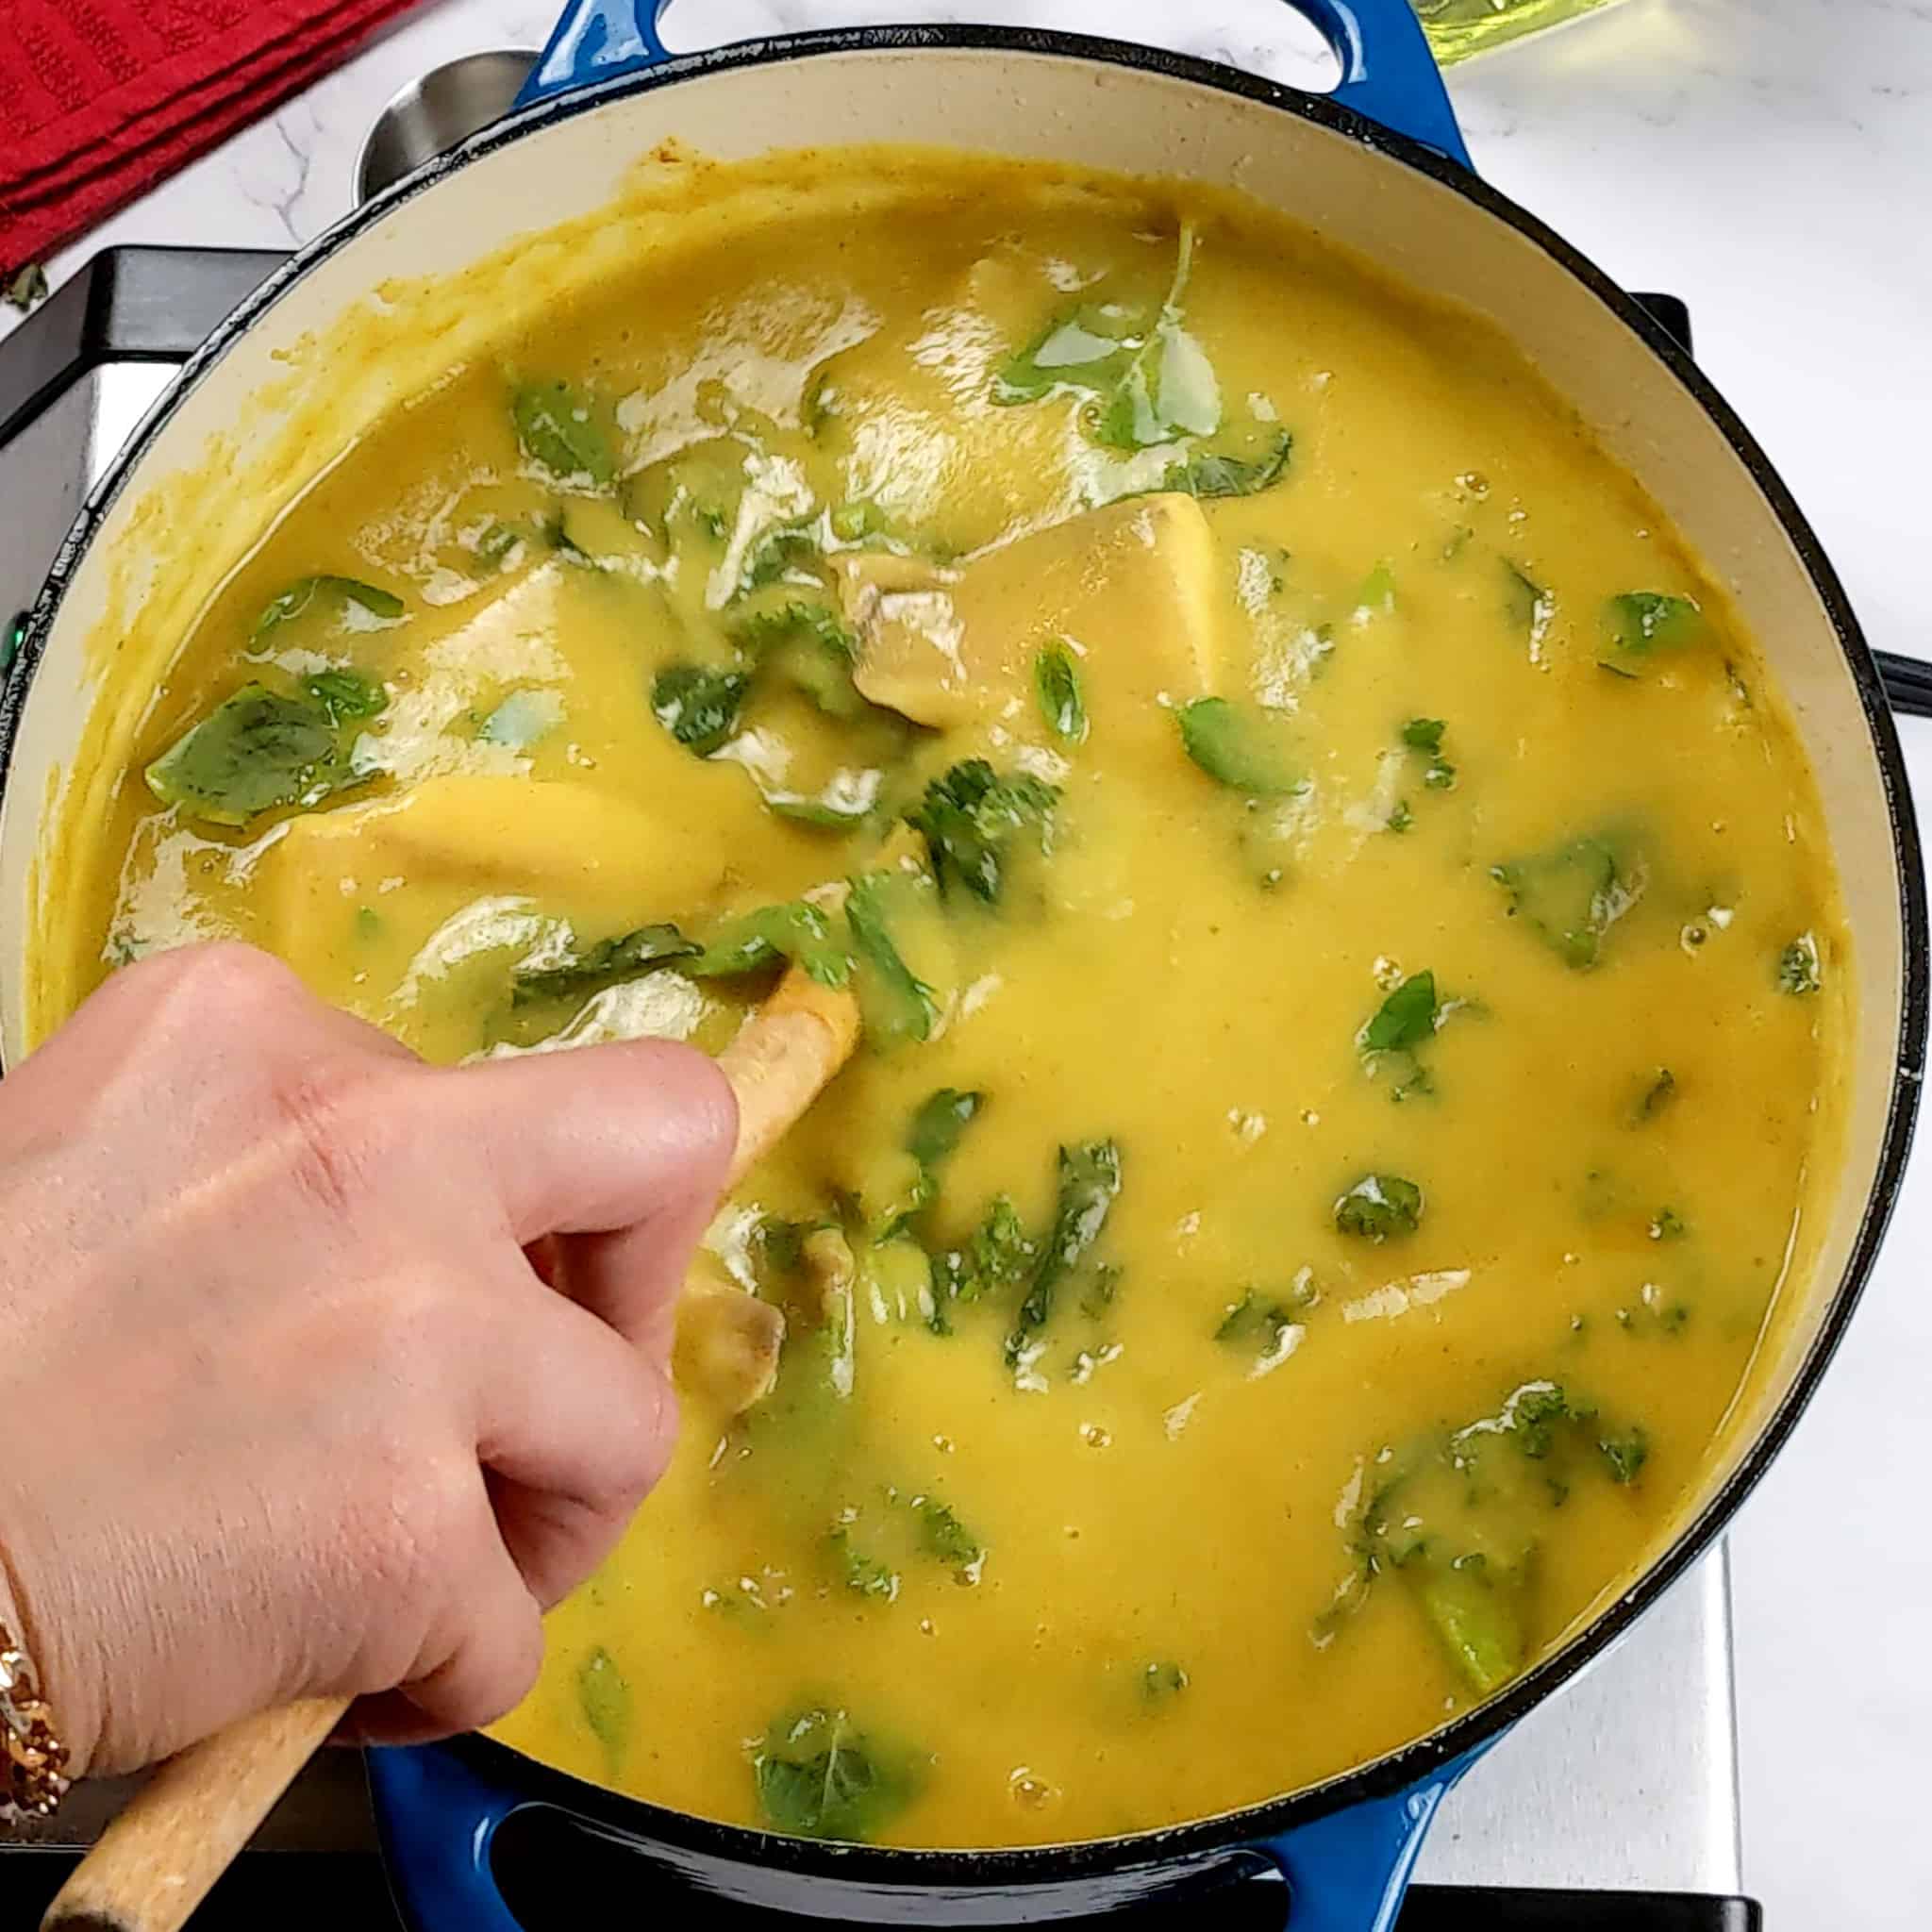 fresh tilapia fish chunks added to the creamy curry potato coconut and kale soup for the Best Fragrant Creamy Potato Coconut Curry Fish Soup recipe being gently stirred with a wooden spoon